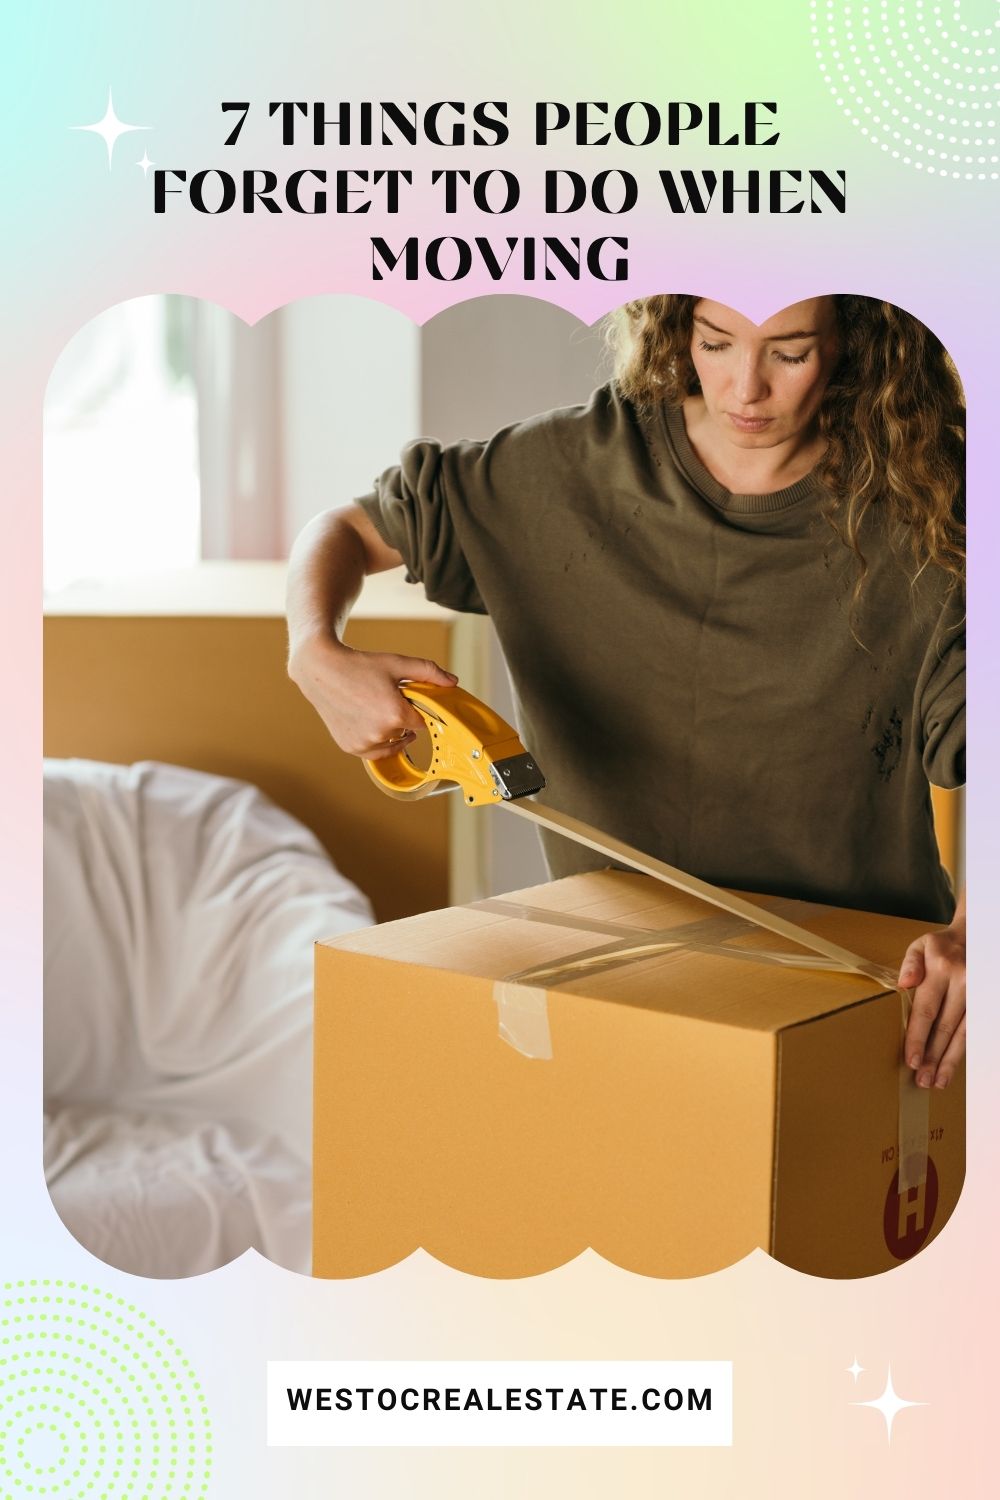 7 Things People Forget to Do When Moving